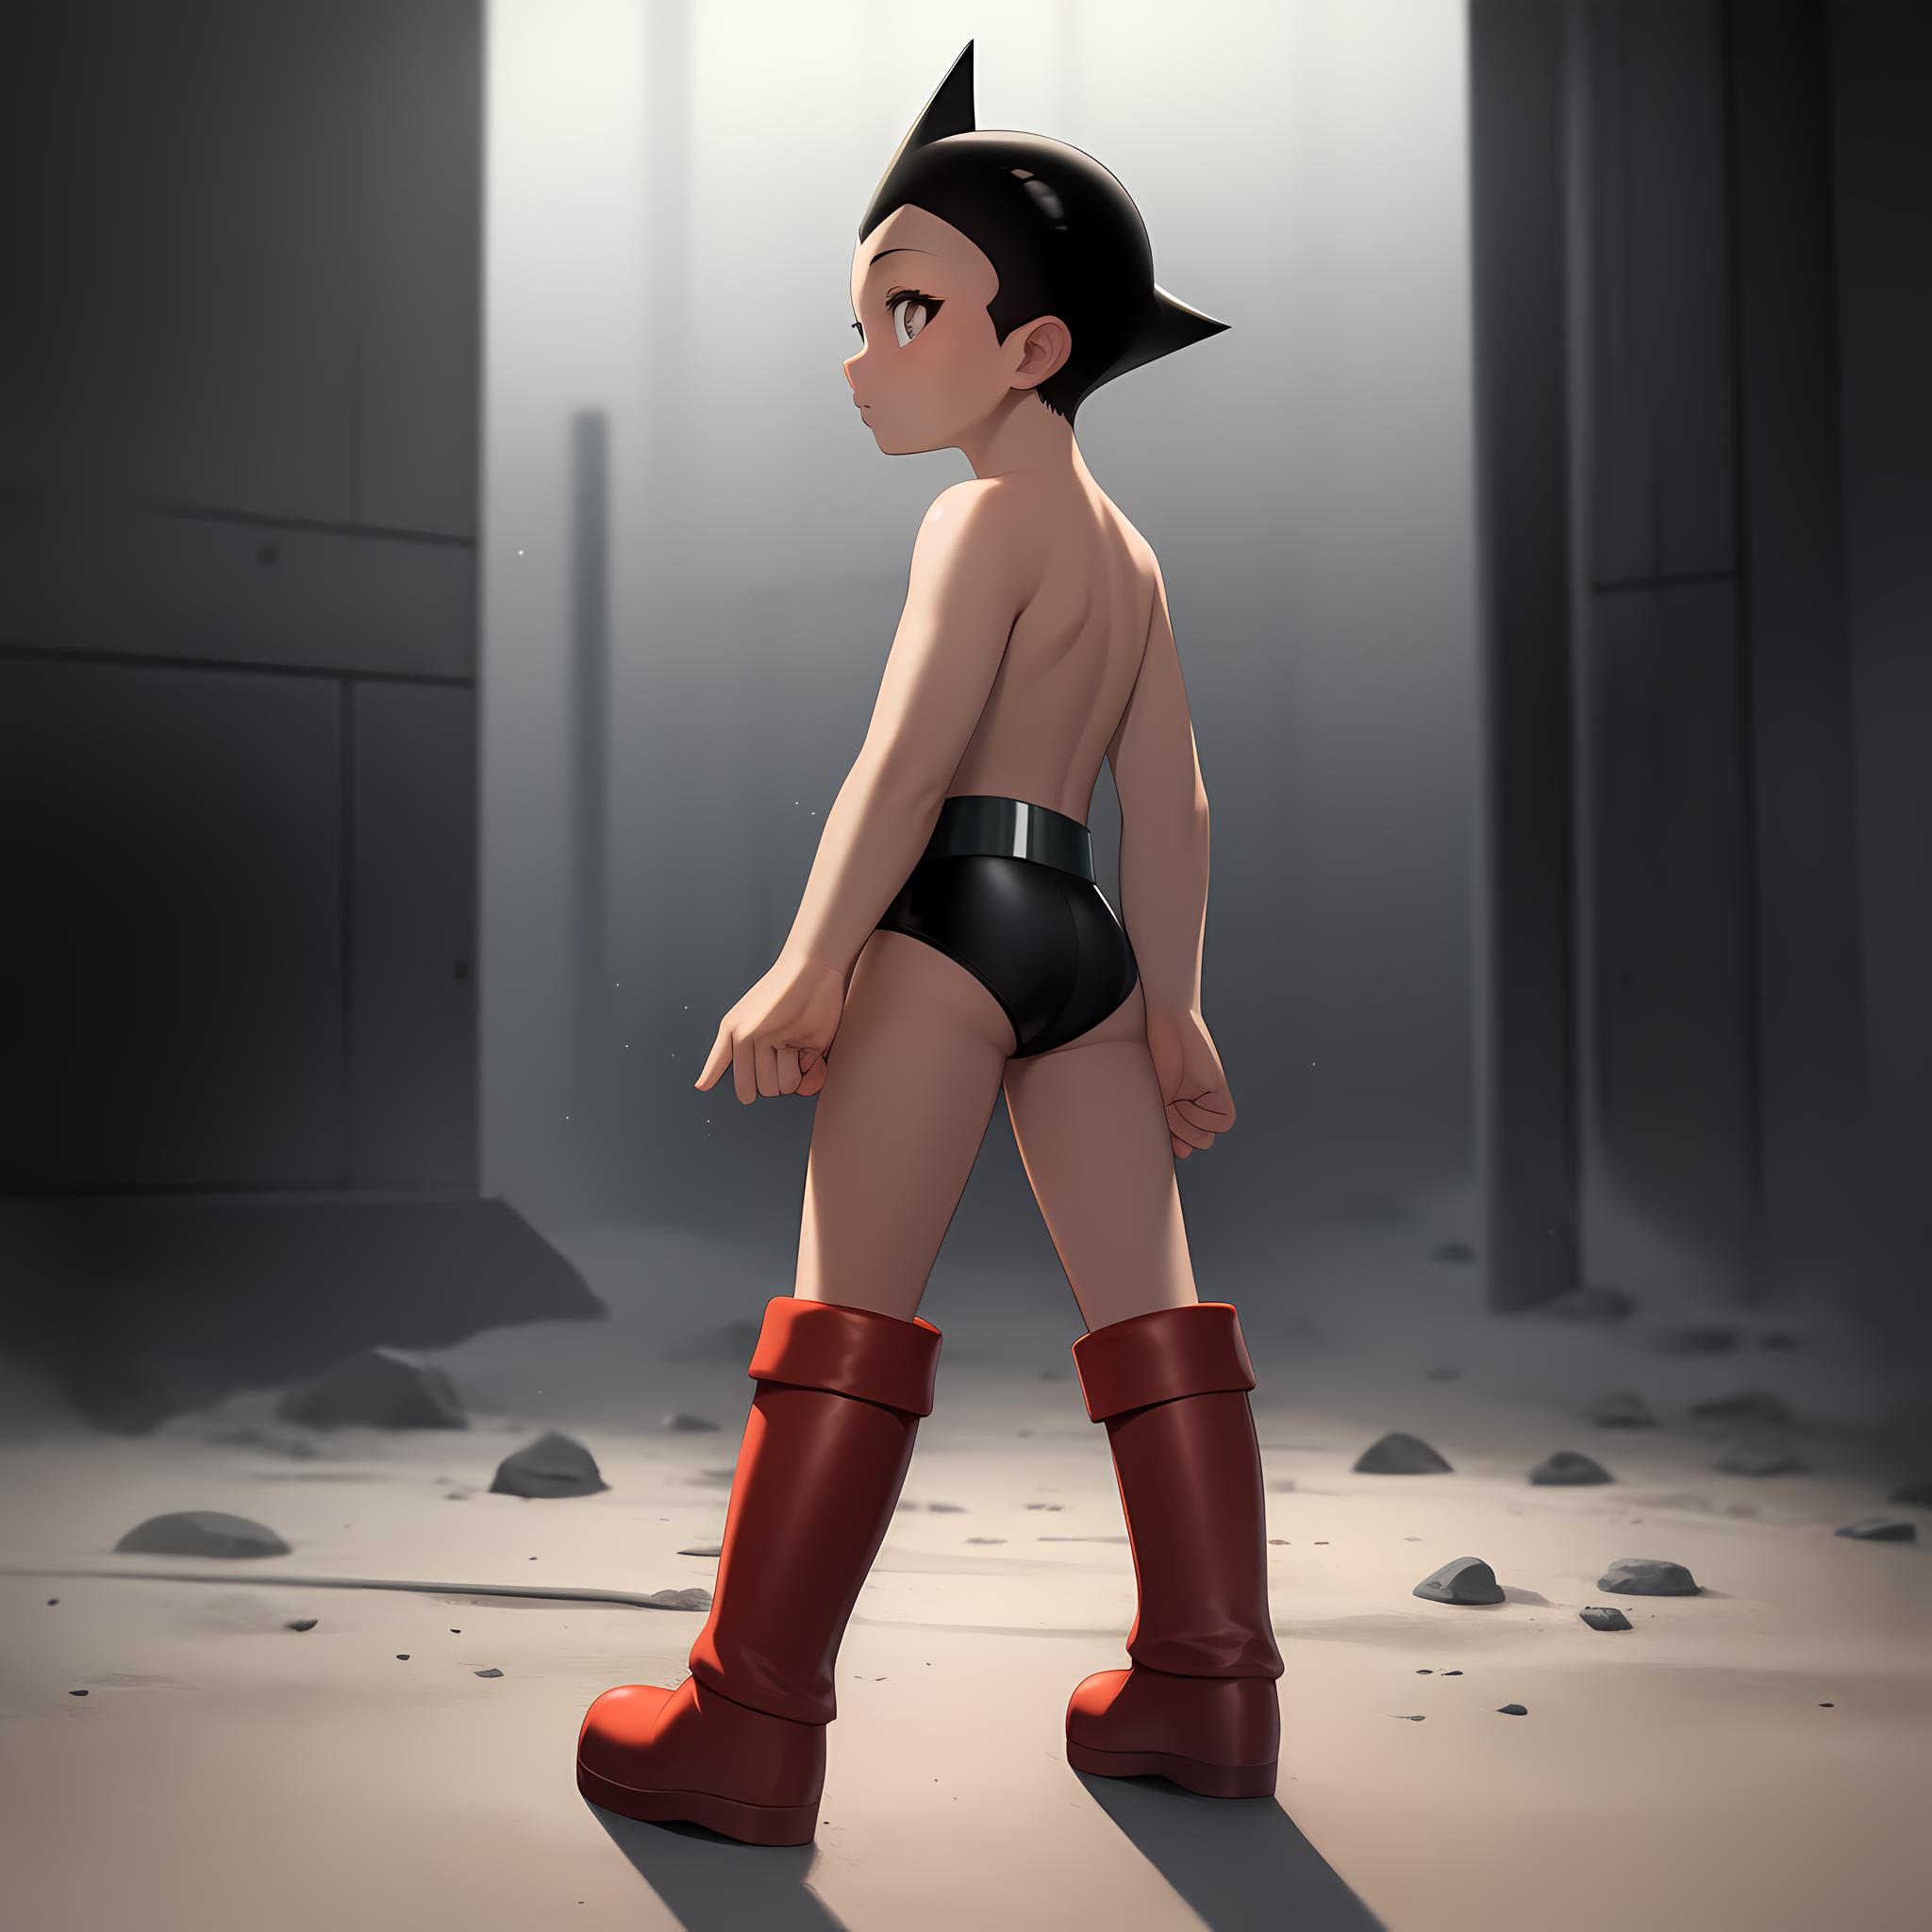 Astro Boy image by TheGooder